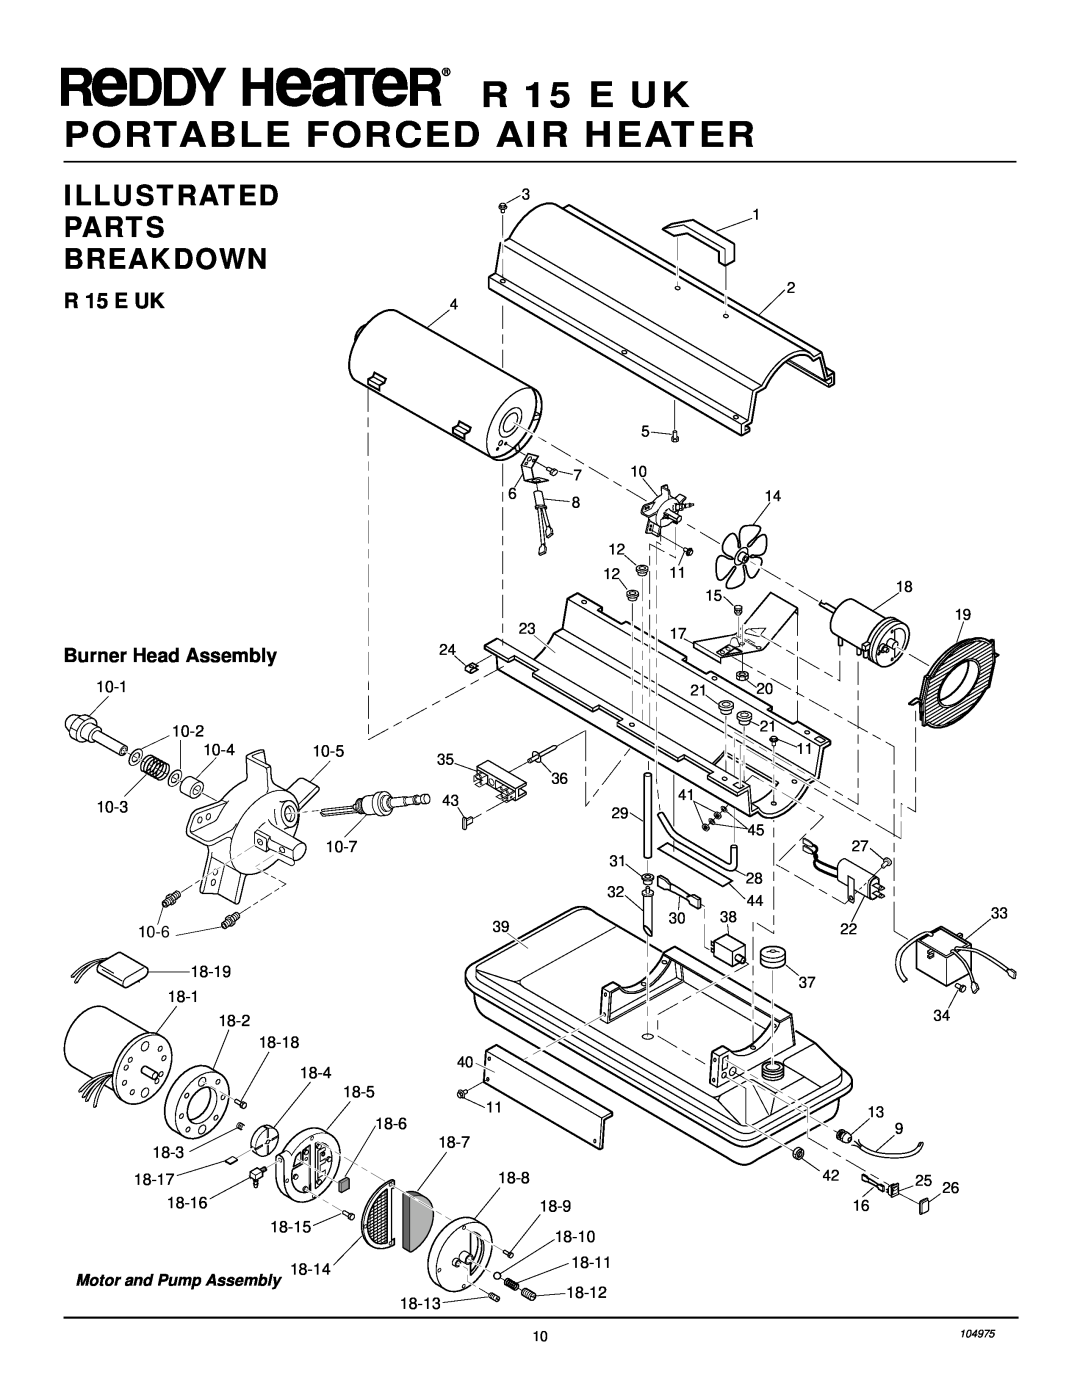 Desa owner manual Illustrated, Parts, Breakdown, R 15 E UK PORTABLE FORCED AIR HEATER, Motor and Pump Assembly 